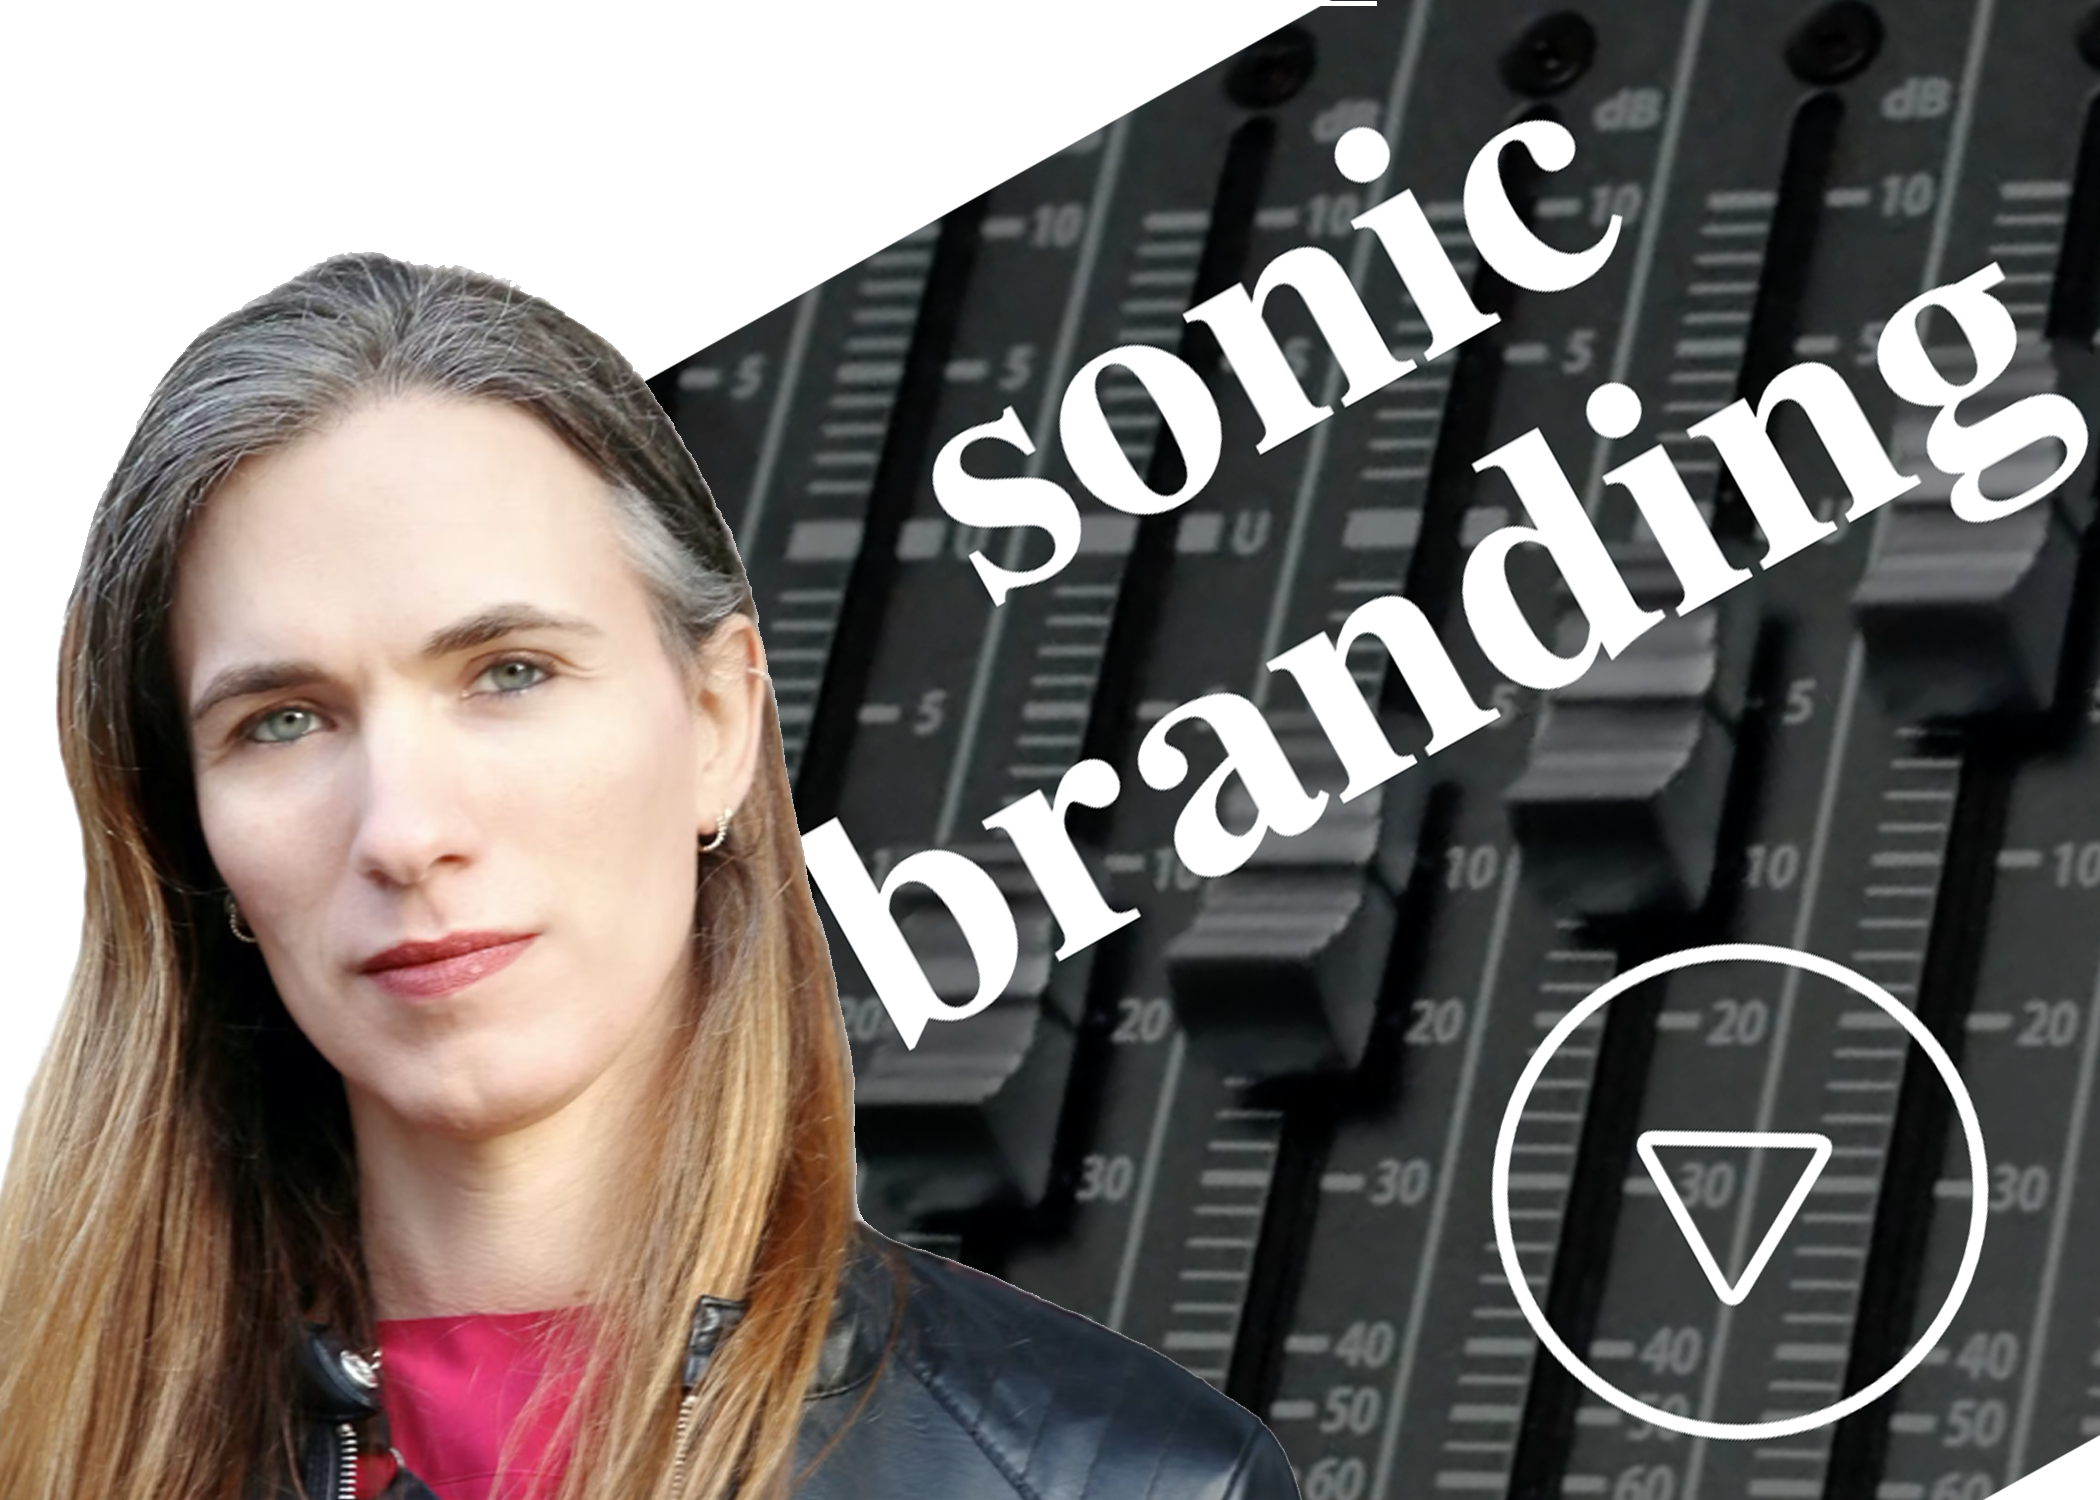 A light skinned woman with long blond hair tucked behind her ear wearing a pink top and black leather jacket next to the phrase "sonic branding"